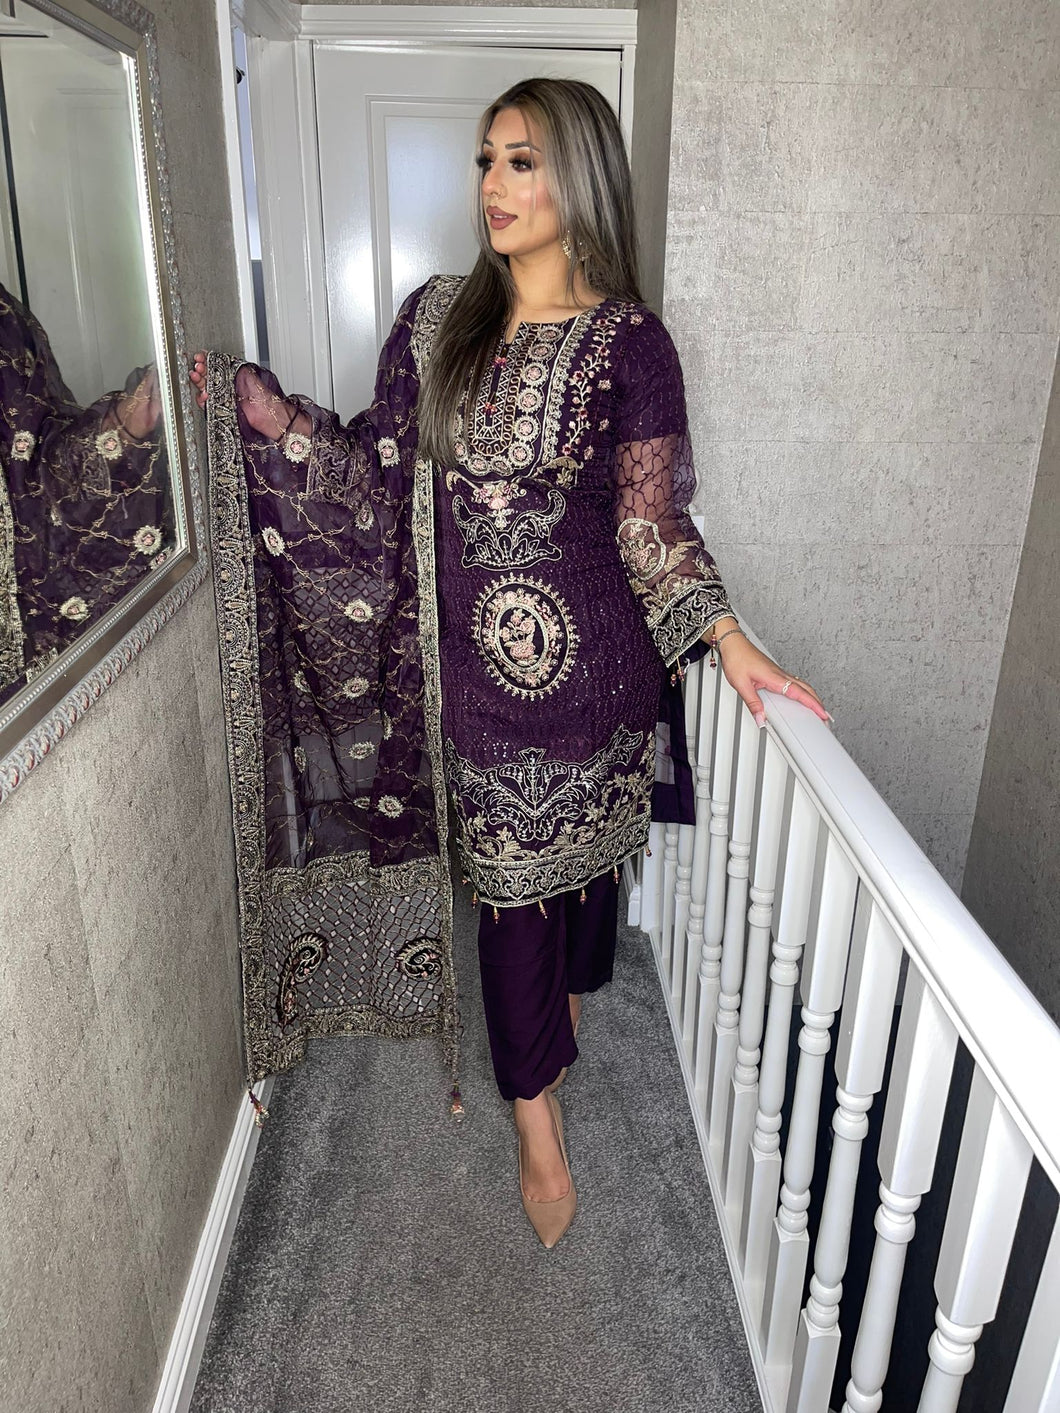 3pc PURPLE Embroidered Shalwar Kameez with NET dupatta Stitched Suit Ready to wear HW-RMPURPLE01